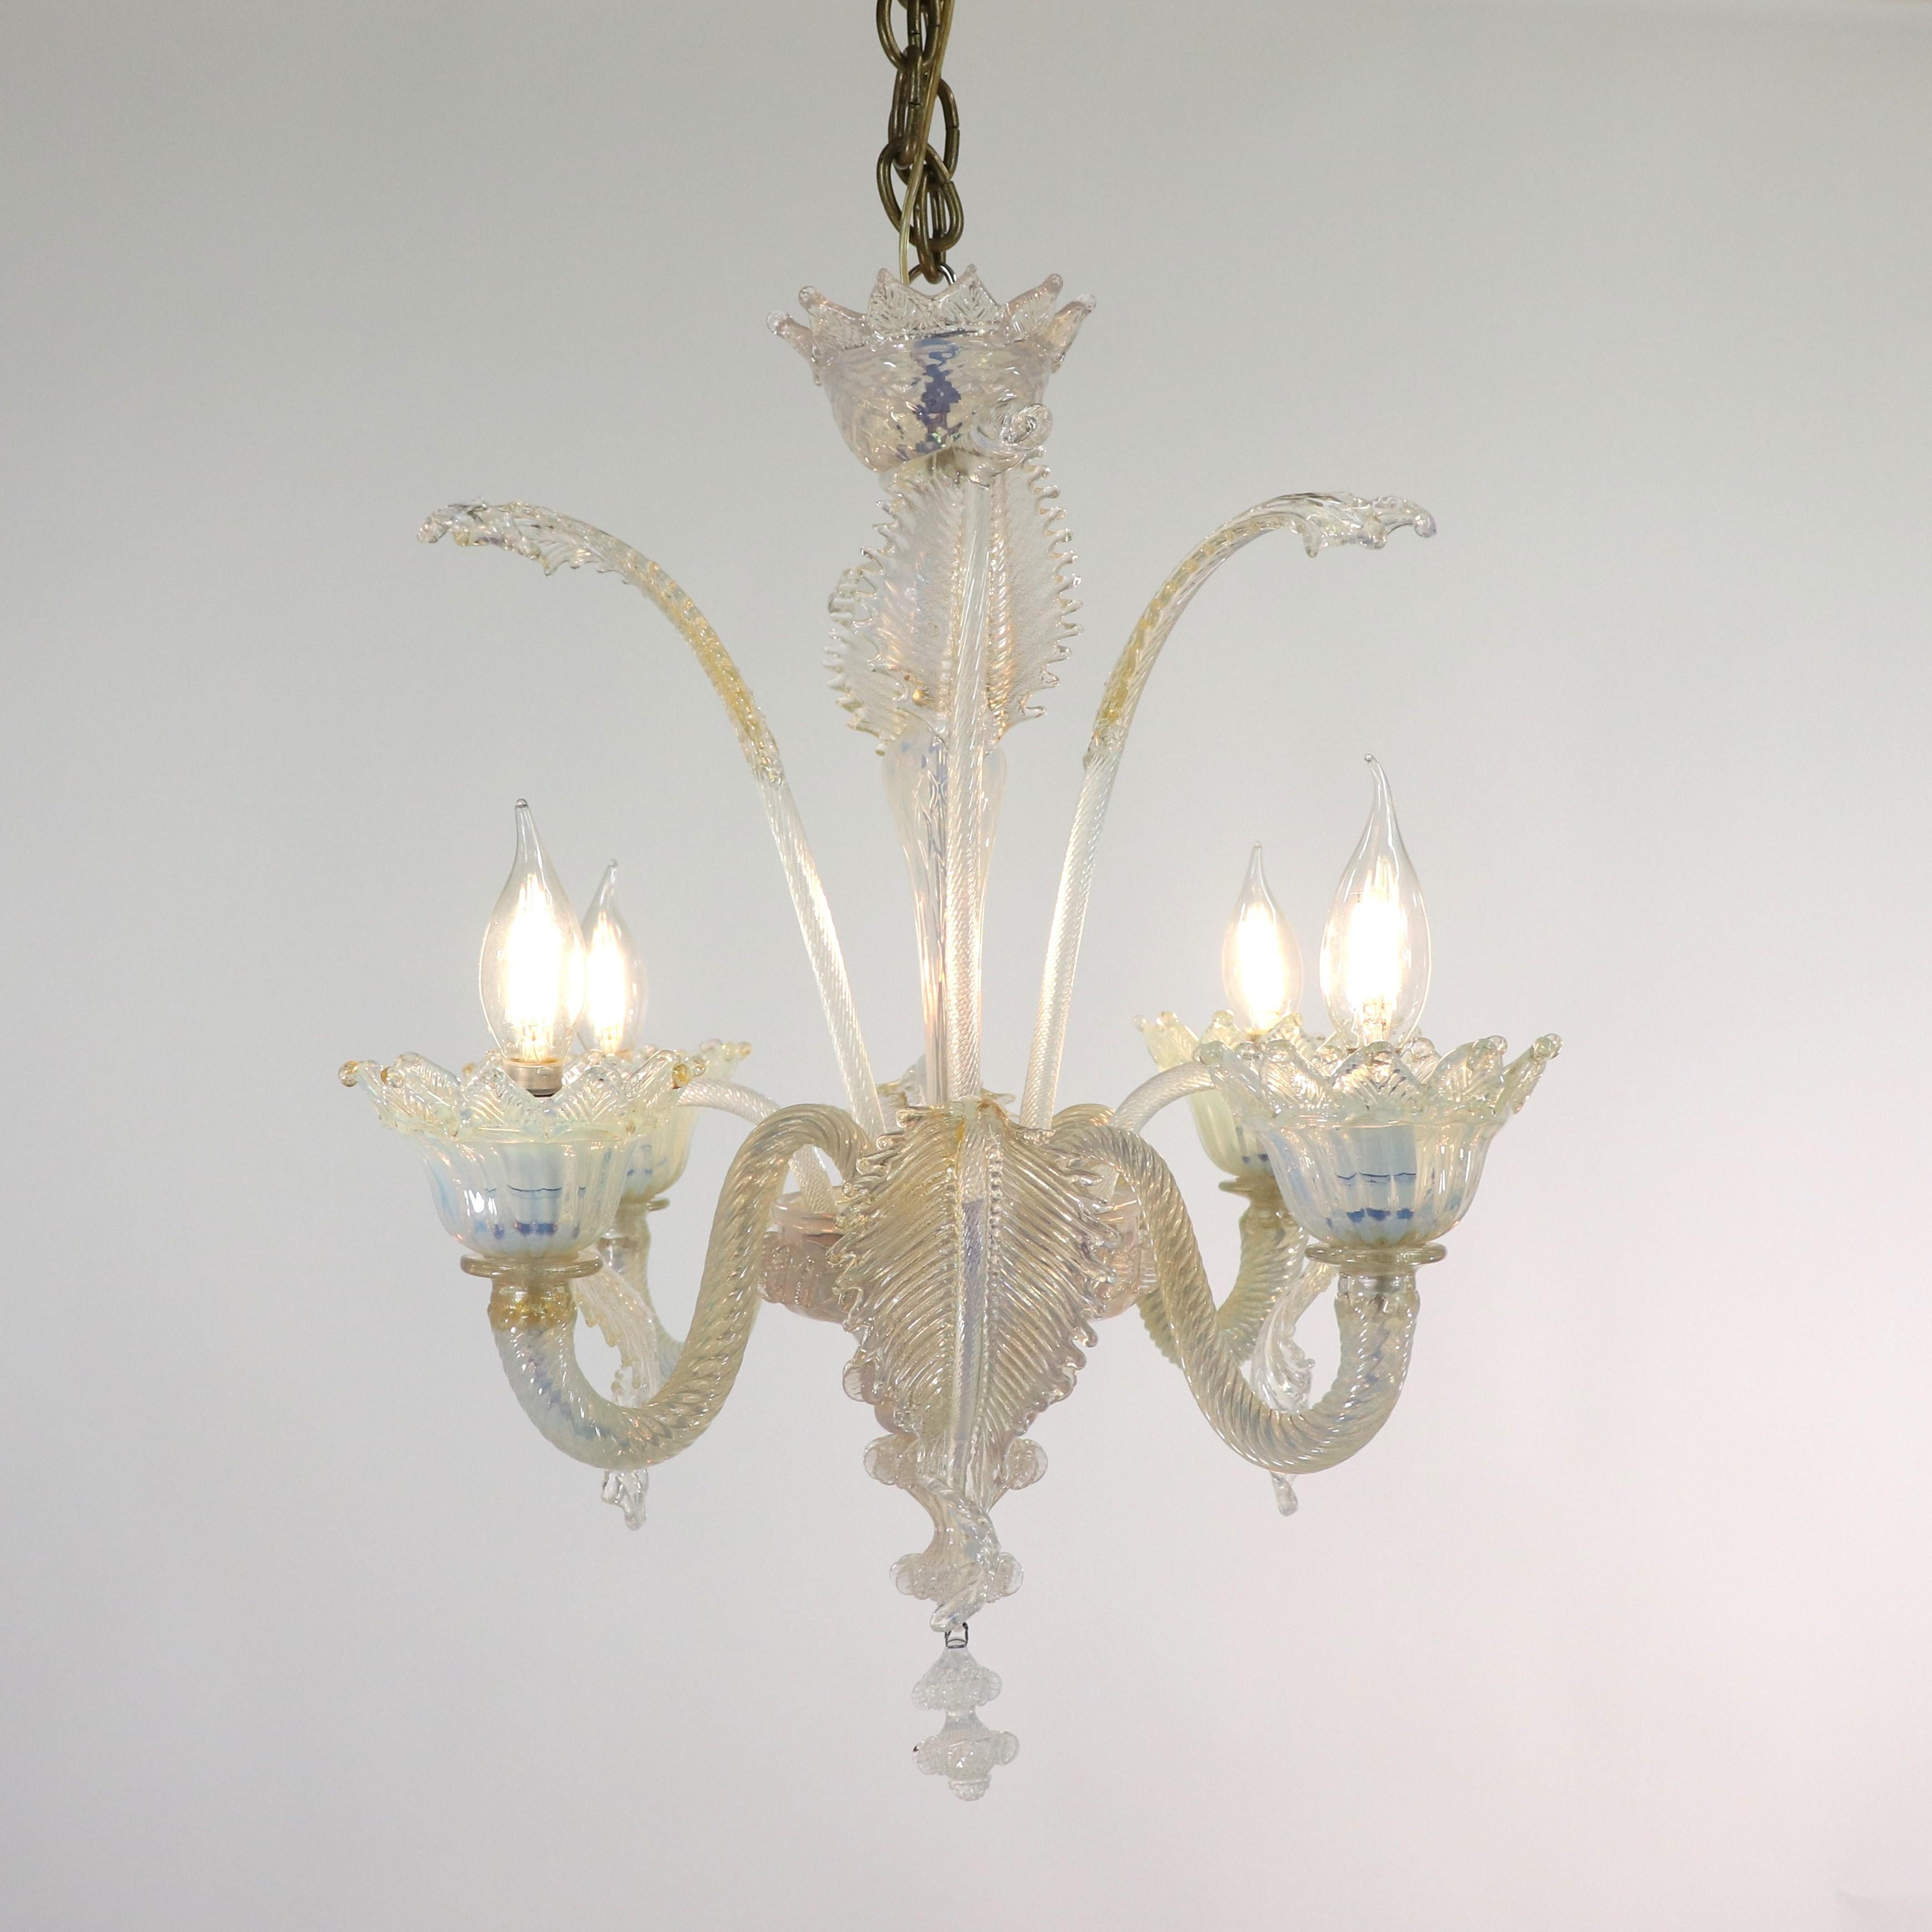 Hand-Crafted Vintage Baroque Style Gold Infused Opaline Murano Chandelier For Sale